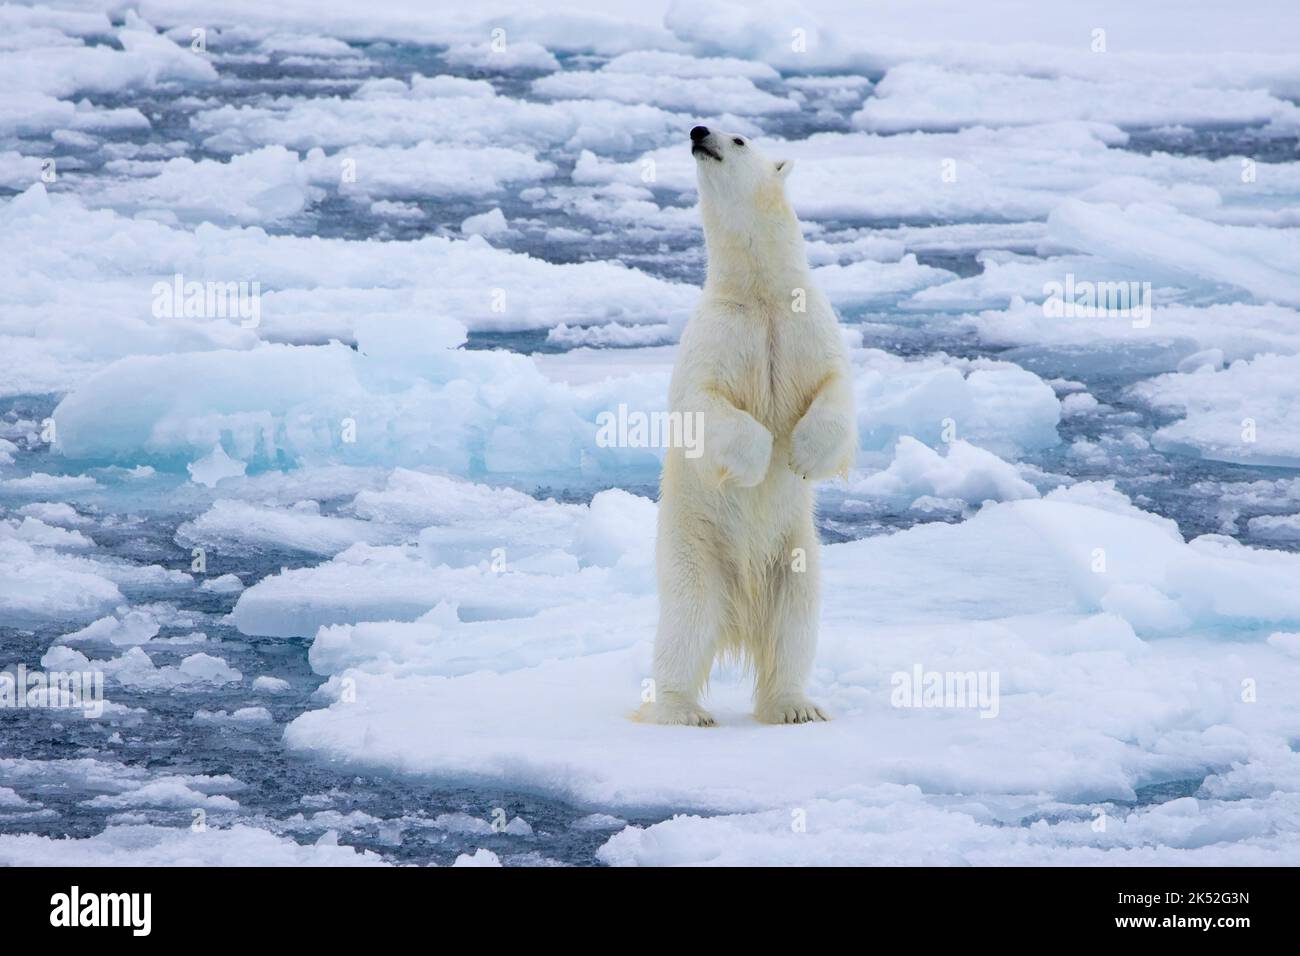 Polar bear (Ursus maritimus) standing upright to smell scent on drift ice / ice floe in the Arctic Ocean along the Svalbard coast, Spitsbergen, Norway Stock Photo